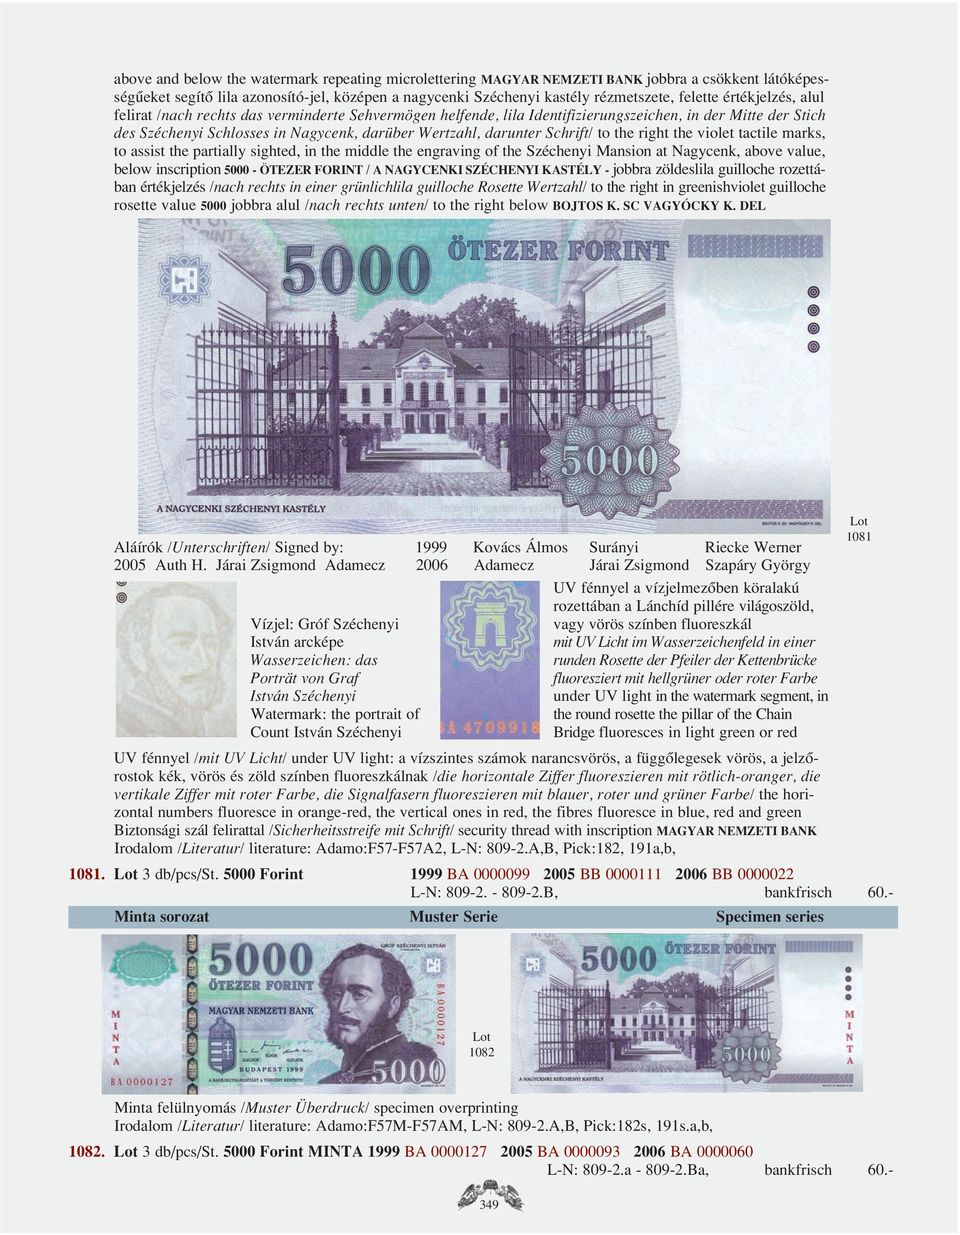 Schrift/ to the right the violet tactile marks, to assist the partially sighted, in the middle the engraving of the Széchenyi Mansion at Nagycenk, above value, below inscription 5000 - ÖTEZER FORINT